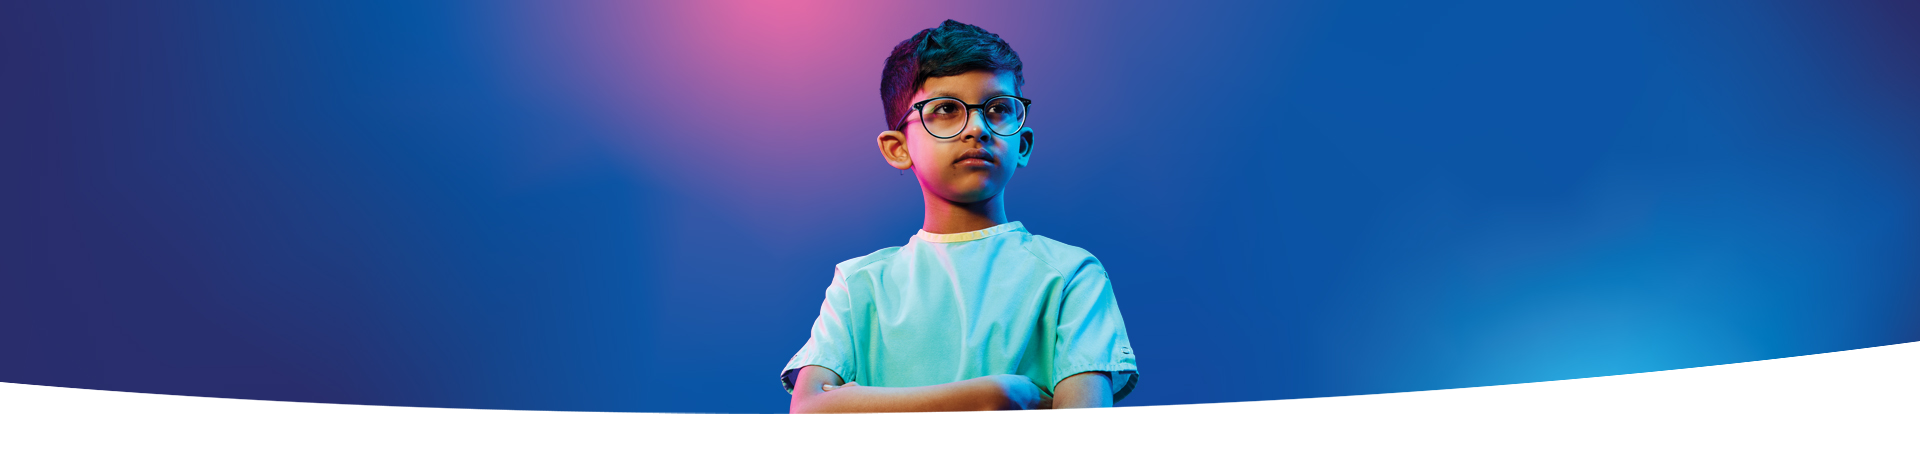 A boy wearing glasses and crossing his arms in front of a blue and pink gradient background.